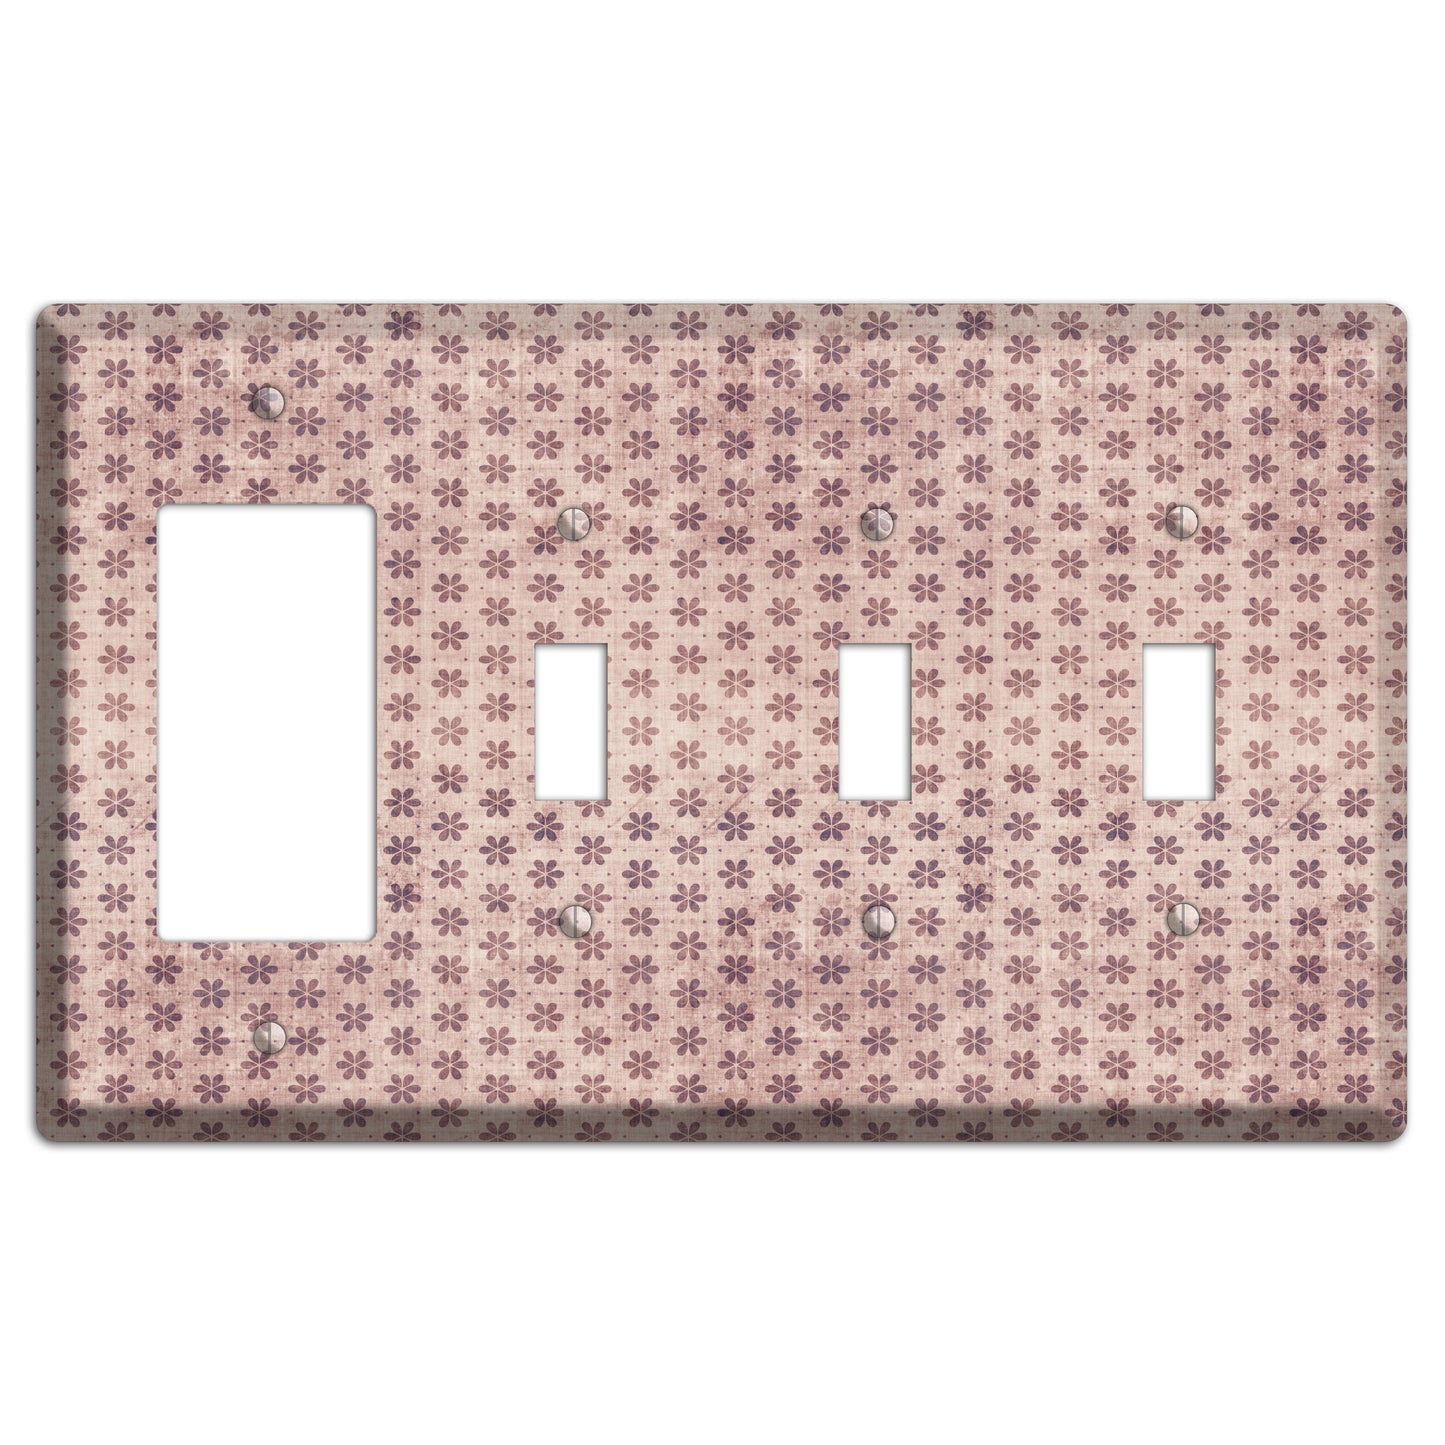 Dusty Pink Grunge Floral Contour Rocker / 3 Toggle Wallplate